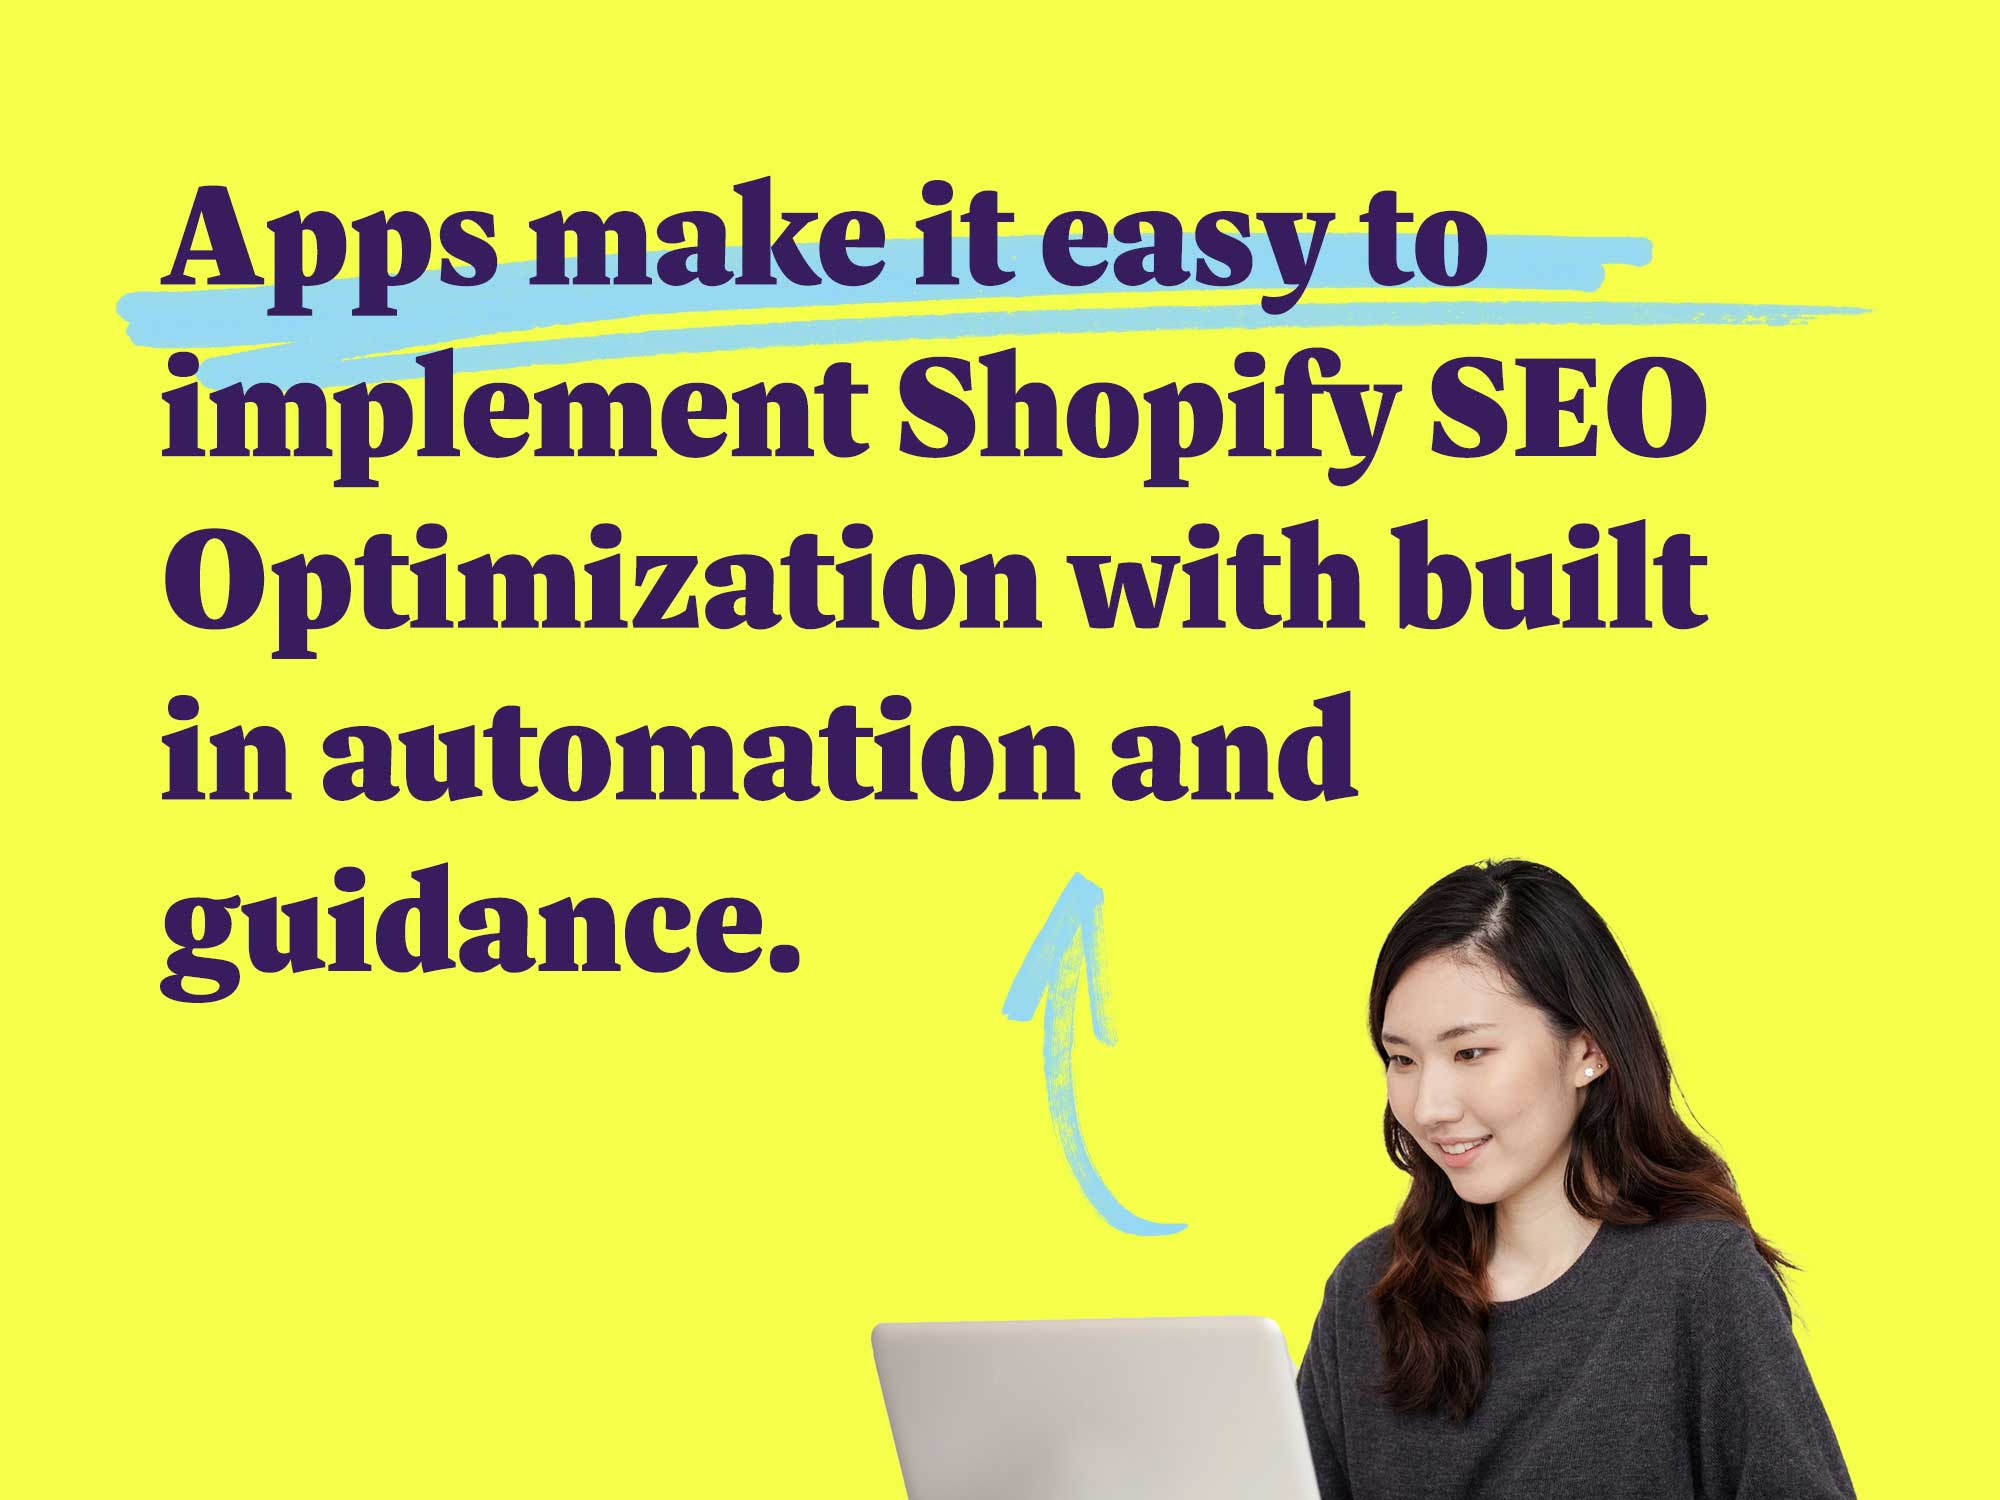 Apps make it easy to implement Shopify SEO Optimization with built in automation and guidance.